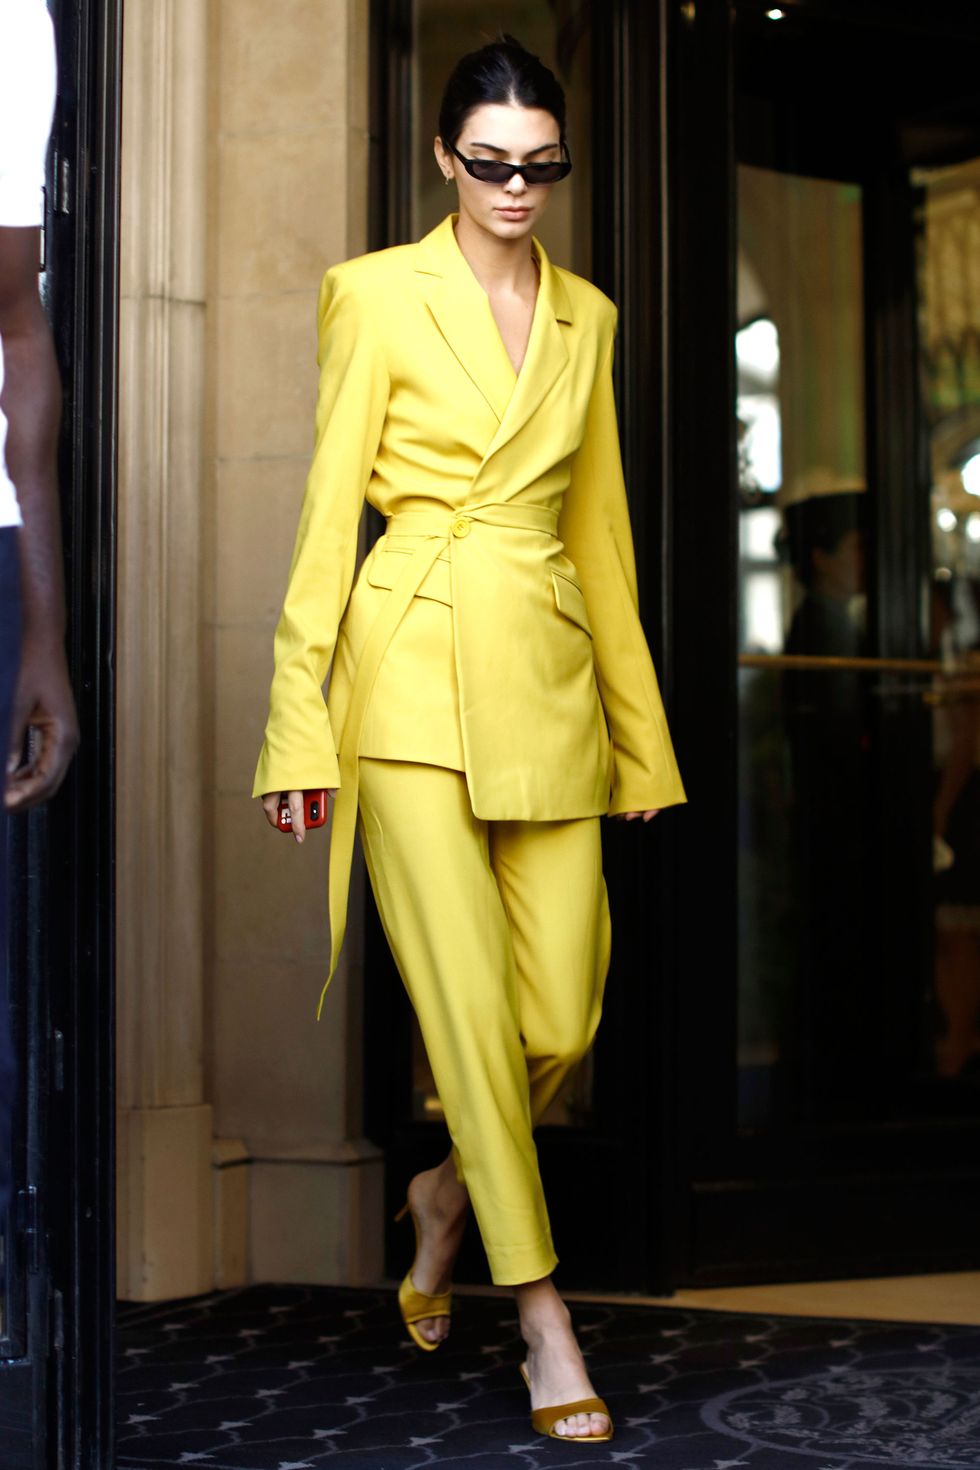 Kendall Jenner in a yellow suit